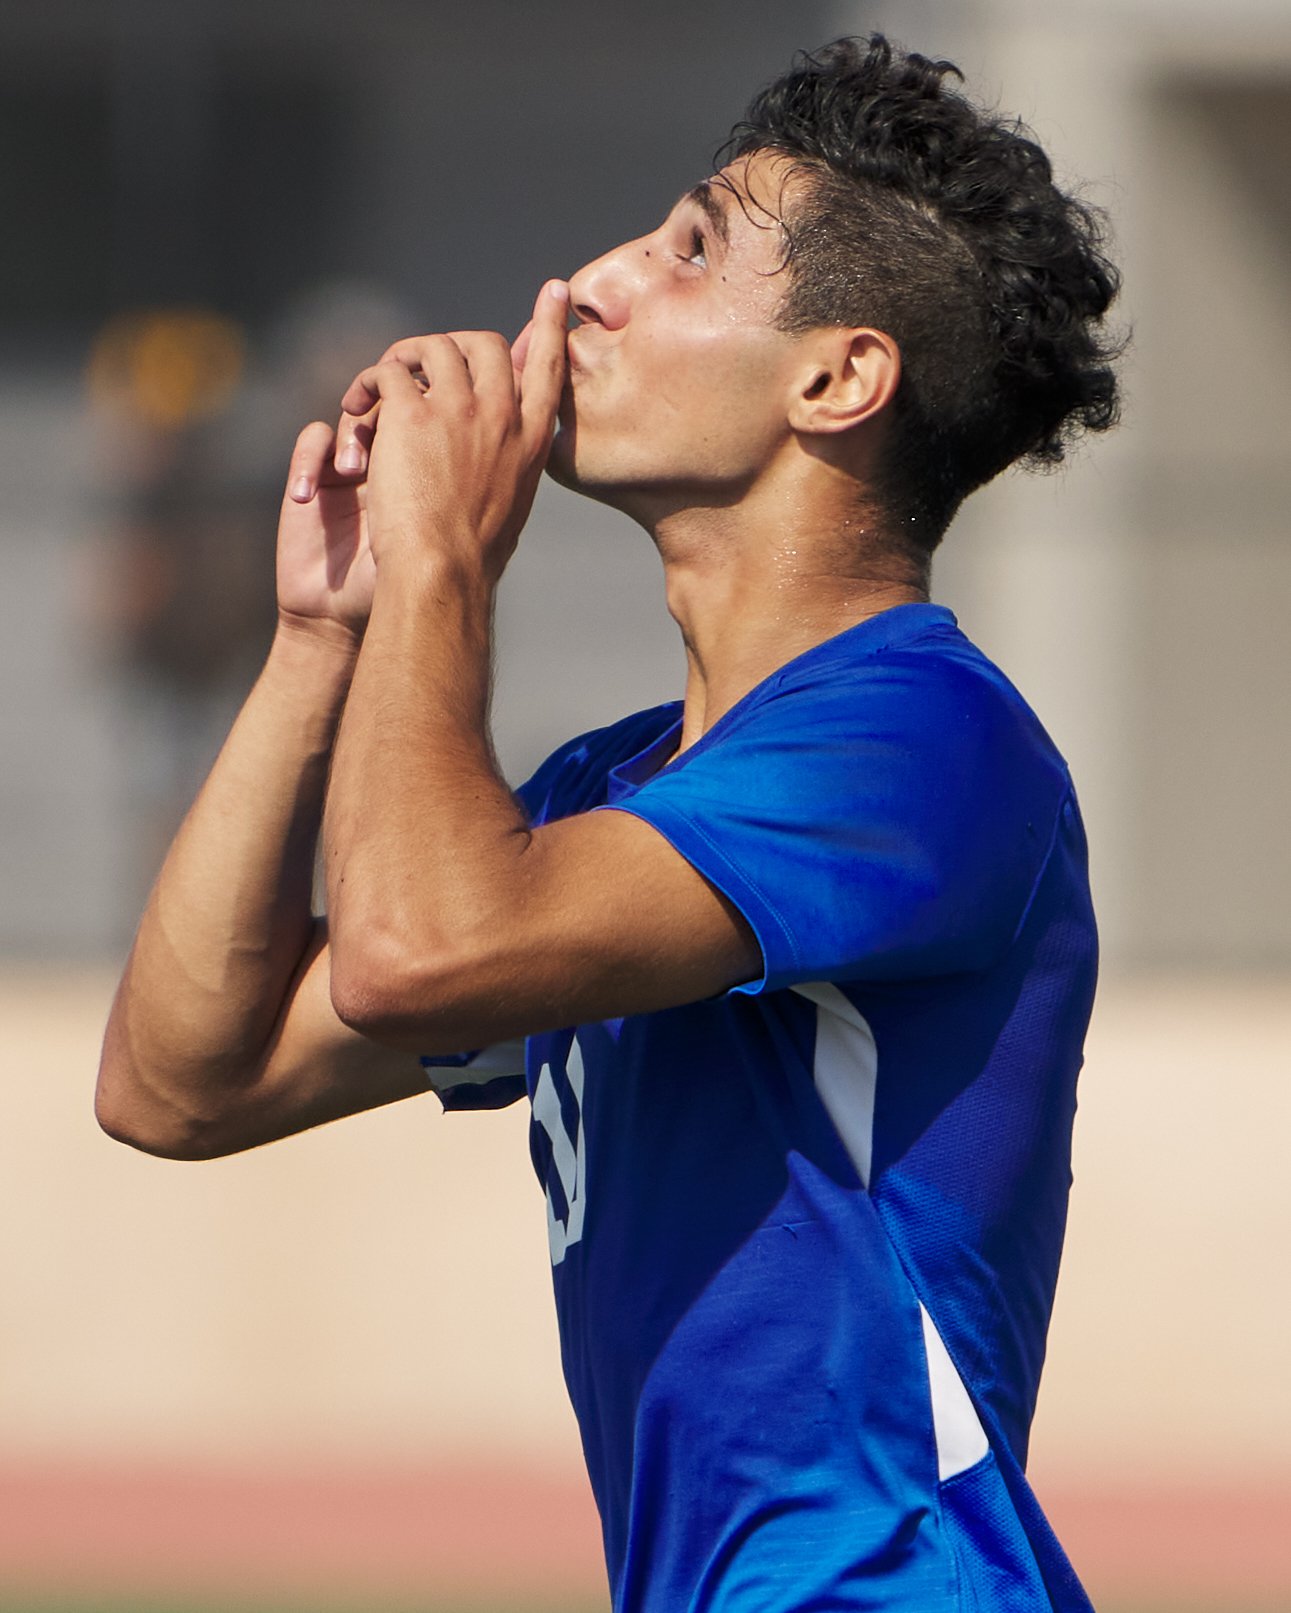  Santa Monica College Corsairs' Roey Kivity sends a kiss to the sky after scoring a goal during the men's soccer match against the Santa Barbara City College Vaqueros on Tuesday, October 11, 2022, at Corsair Field in Santa Monica, Calif. The Corsairs